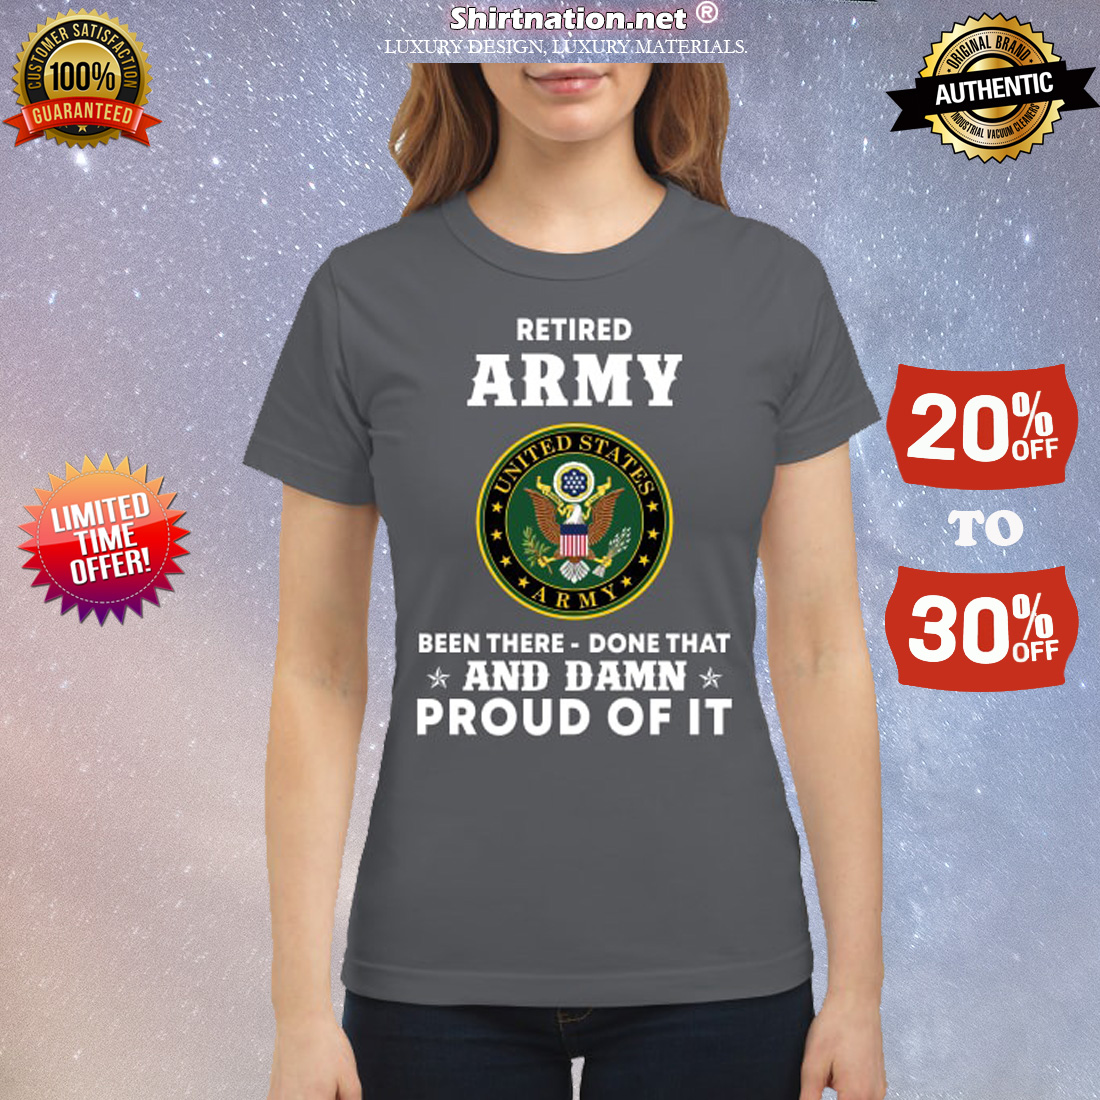 Retired Army been there done that and damn proud of it classic shirt